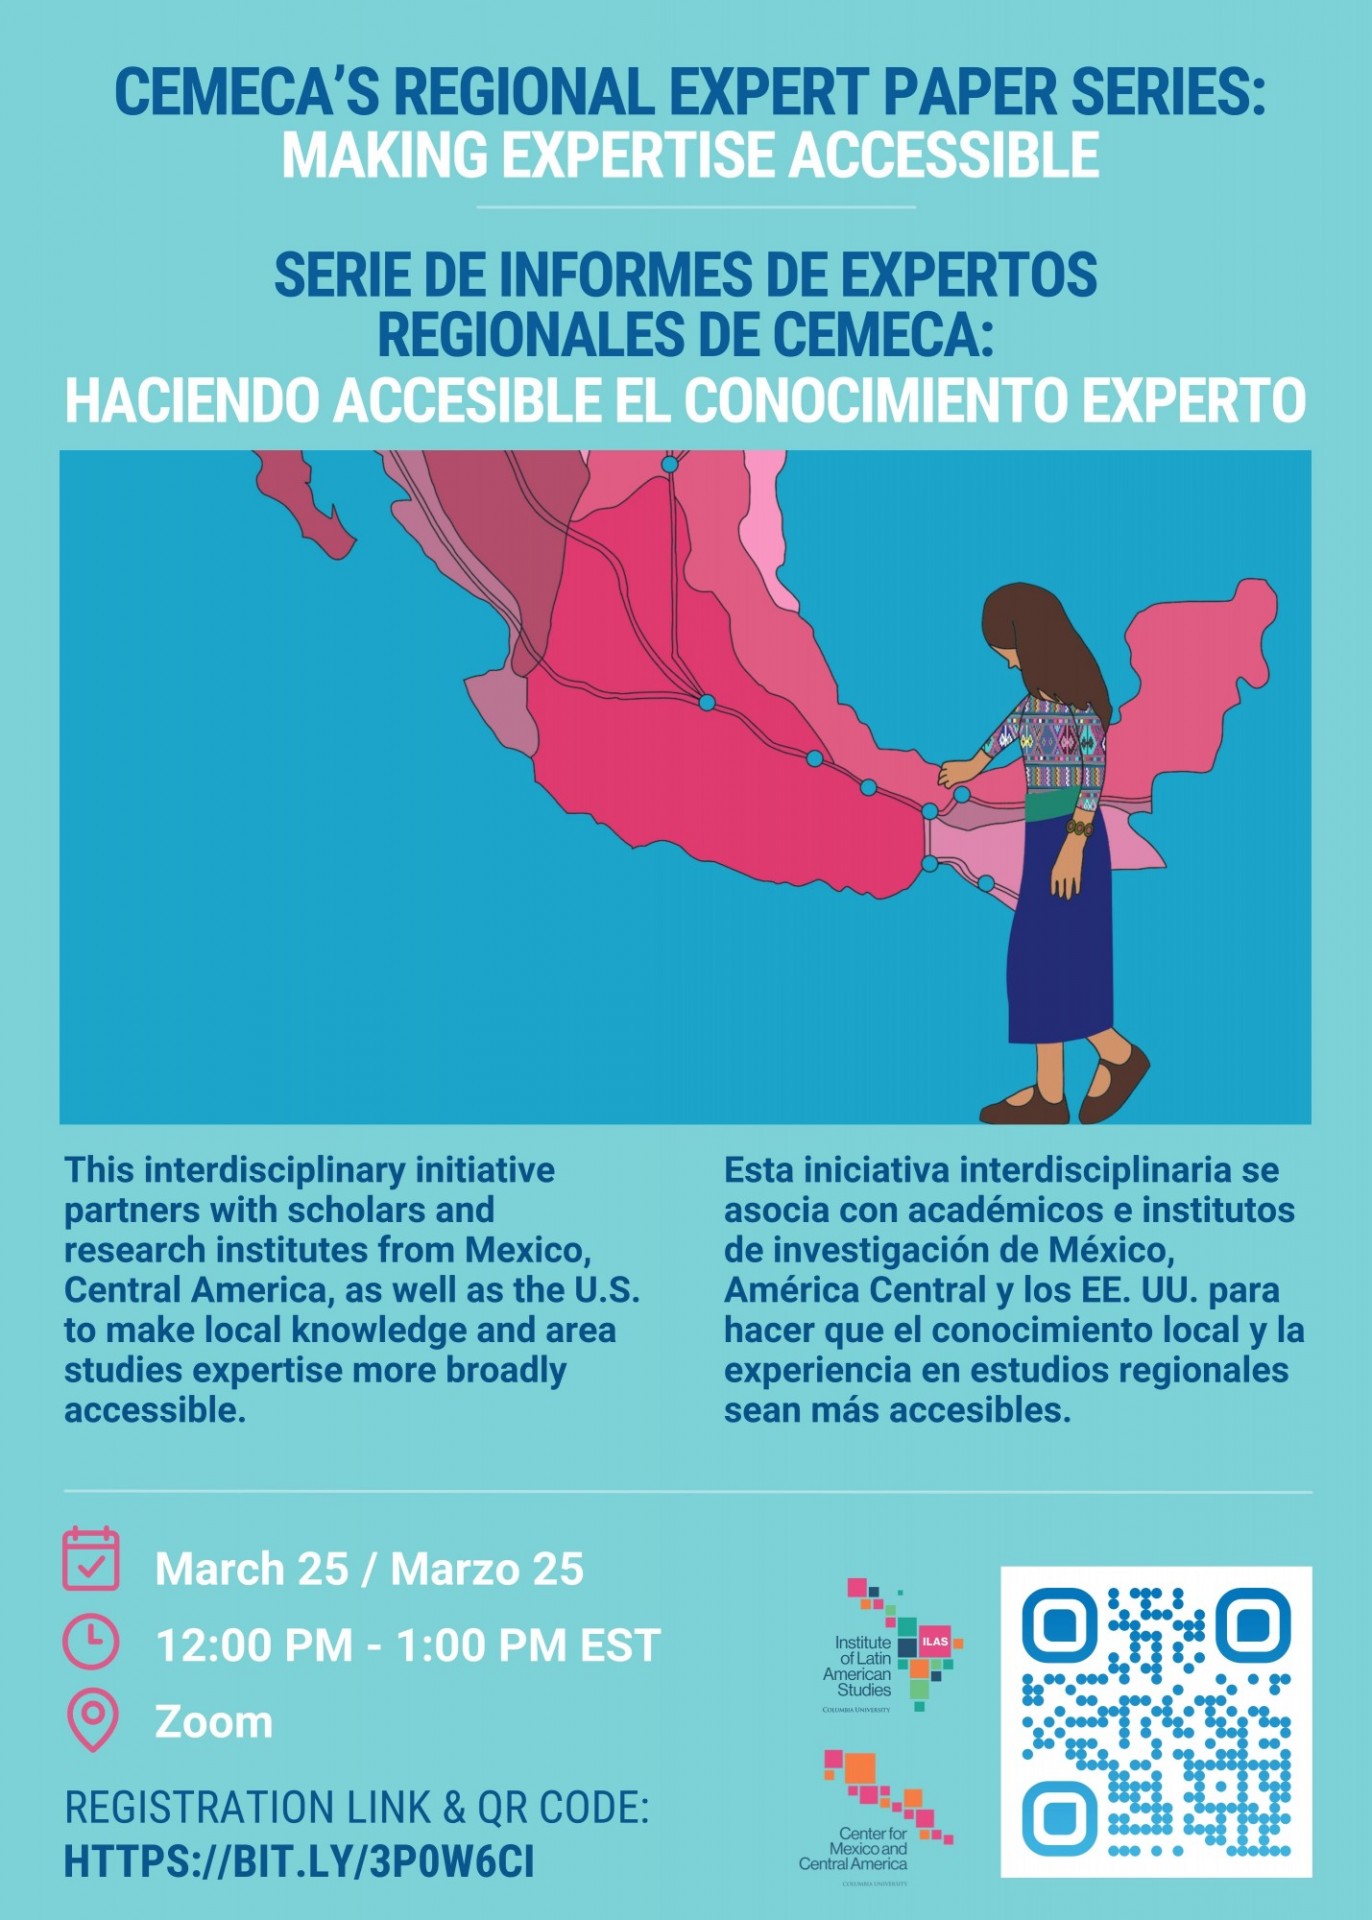 CeMeCA’s Regional Expert Paper Series: Making Expertise Accessible flyer